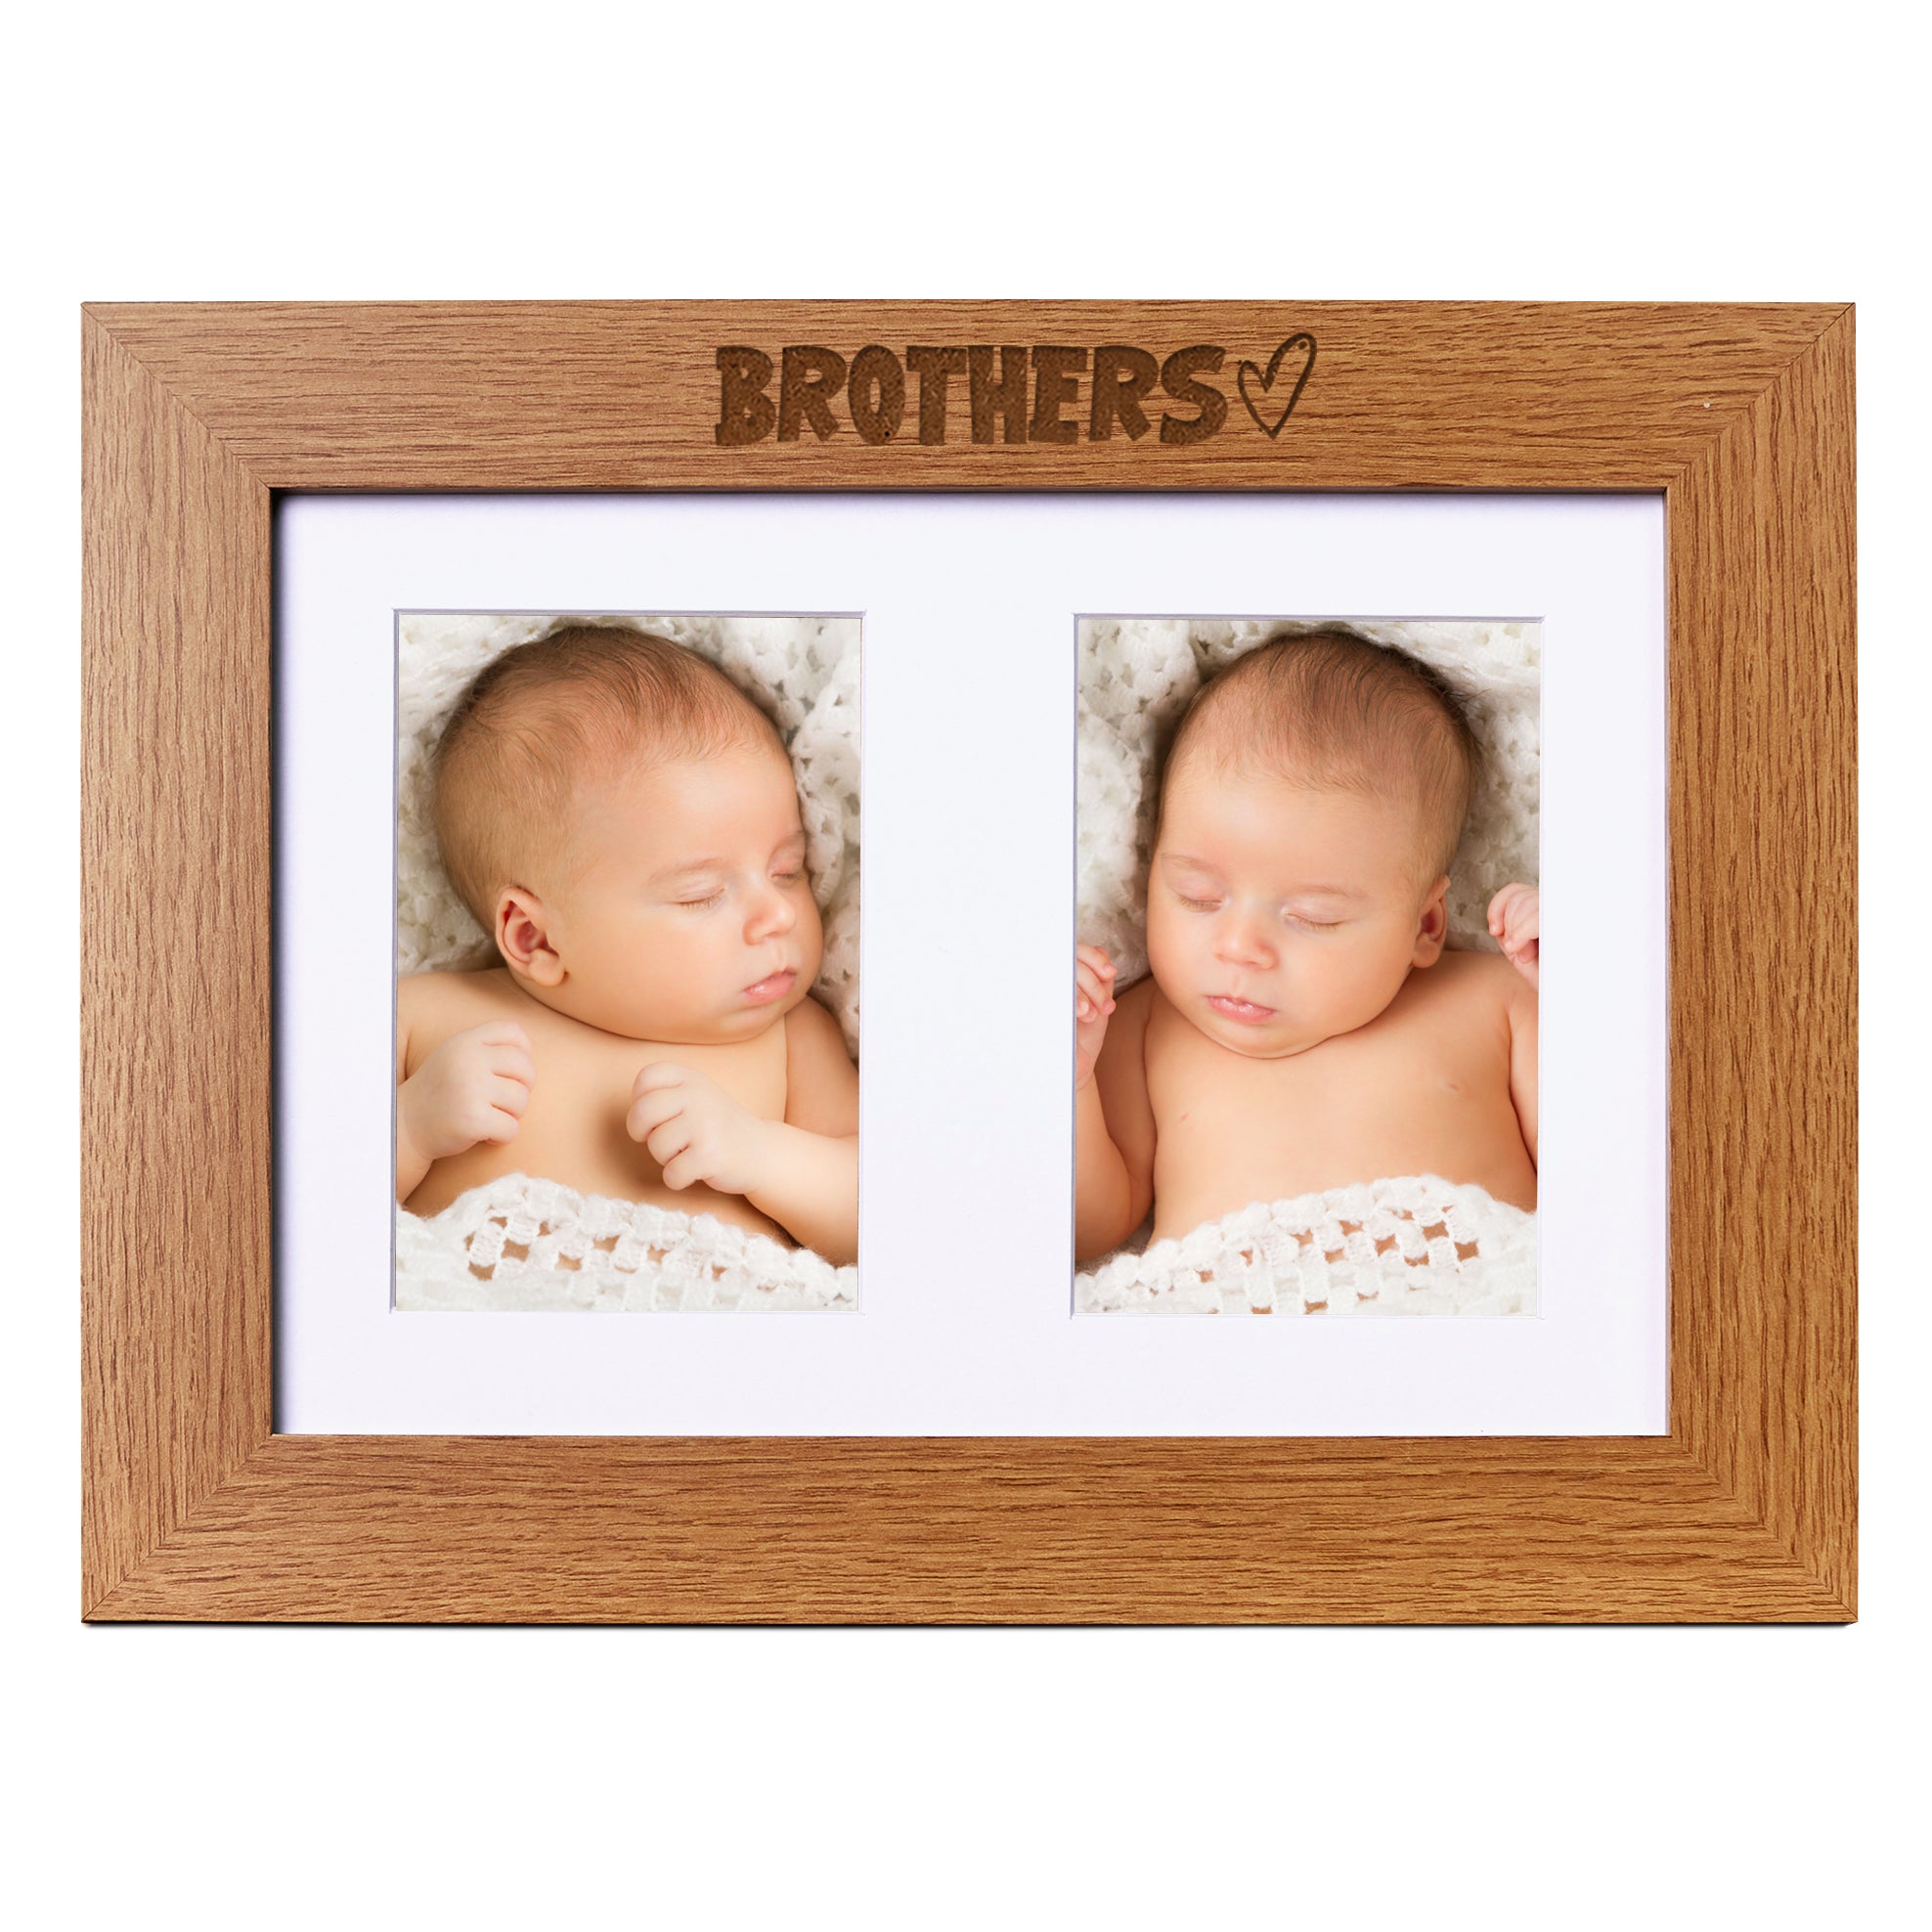 Brothers Photo Picture Frame Double 6x4 Inch